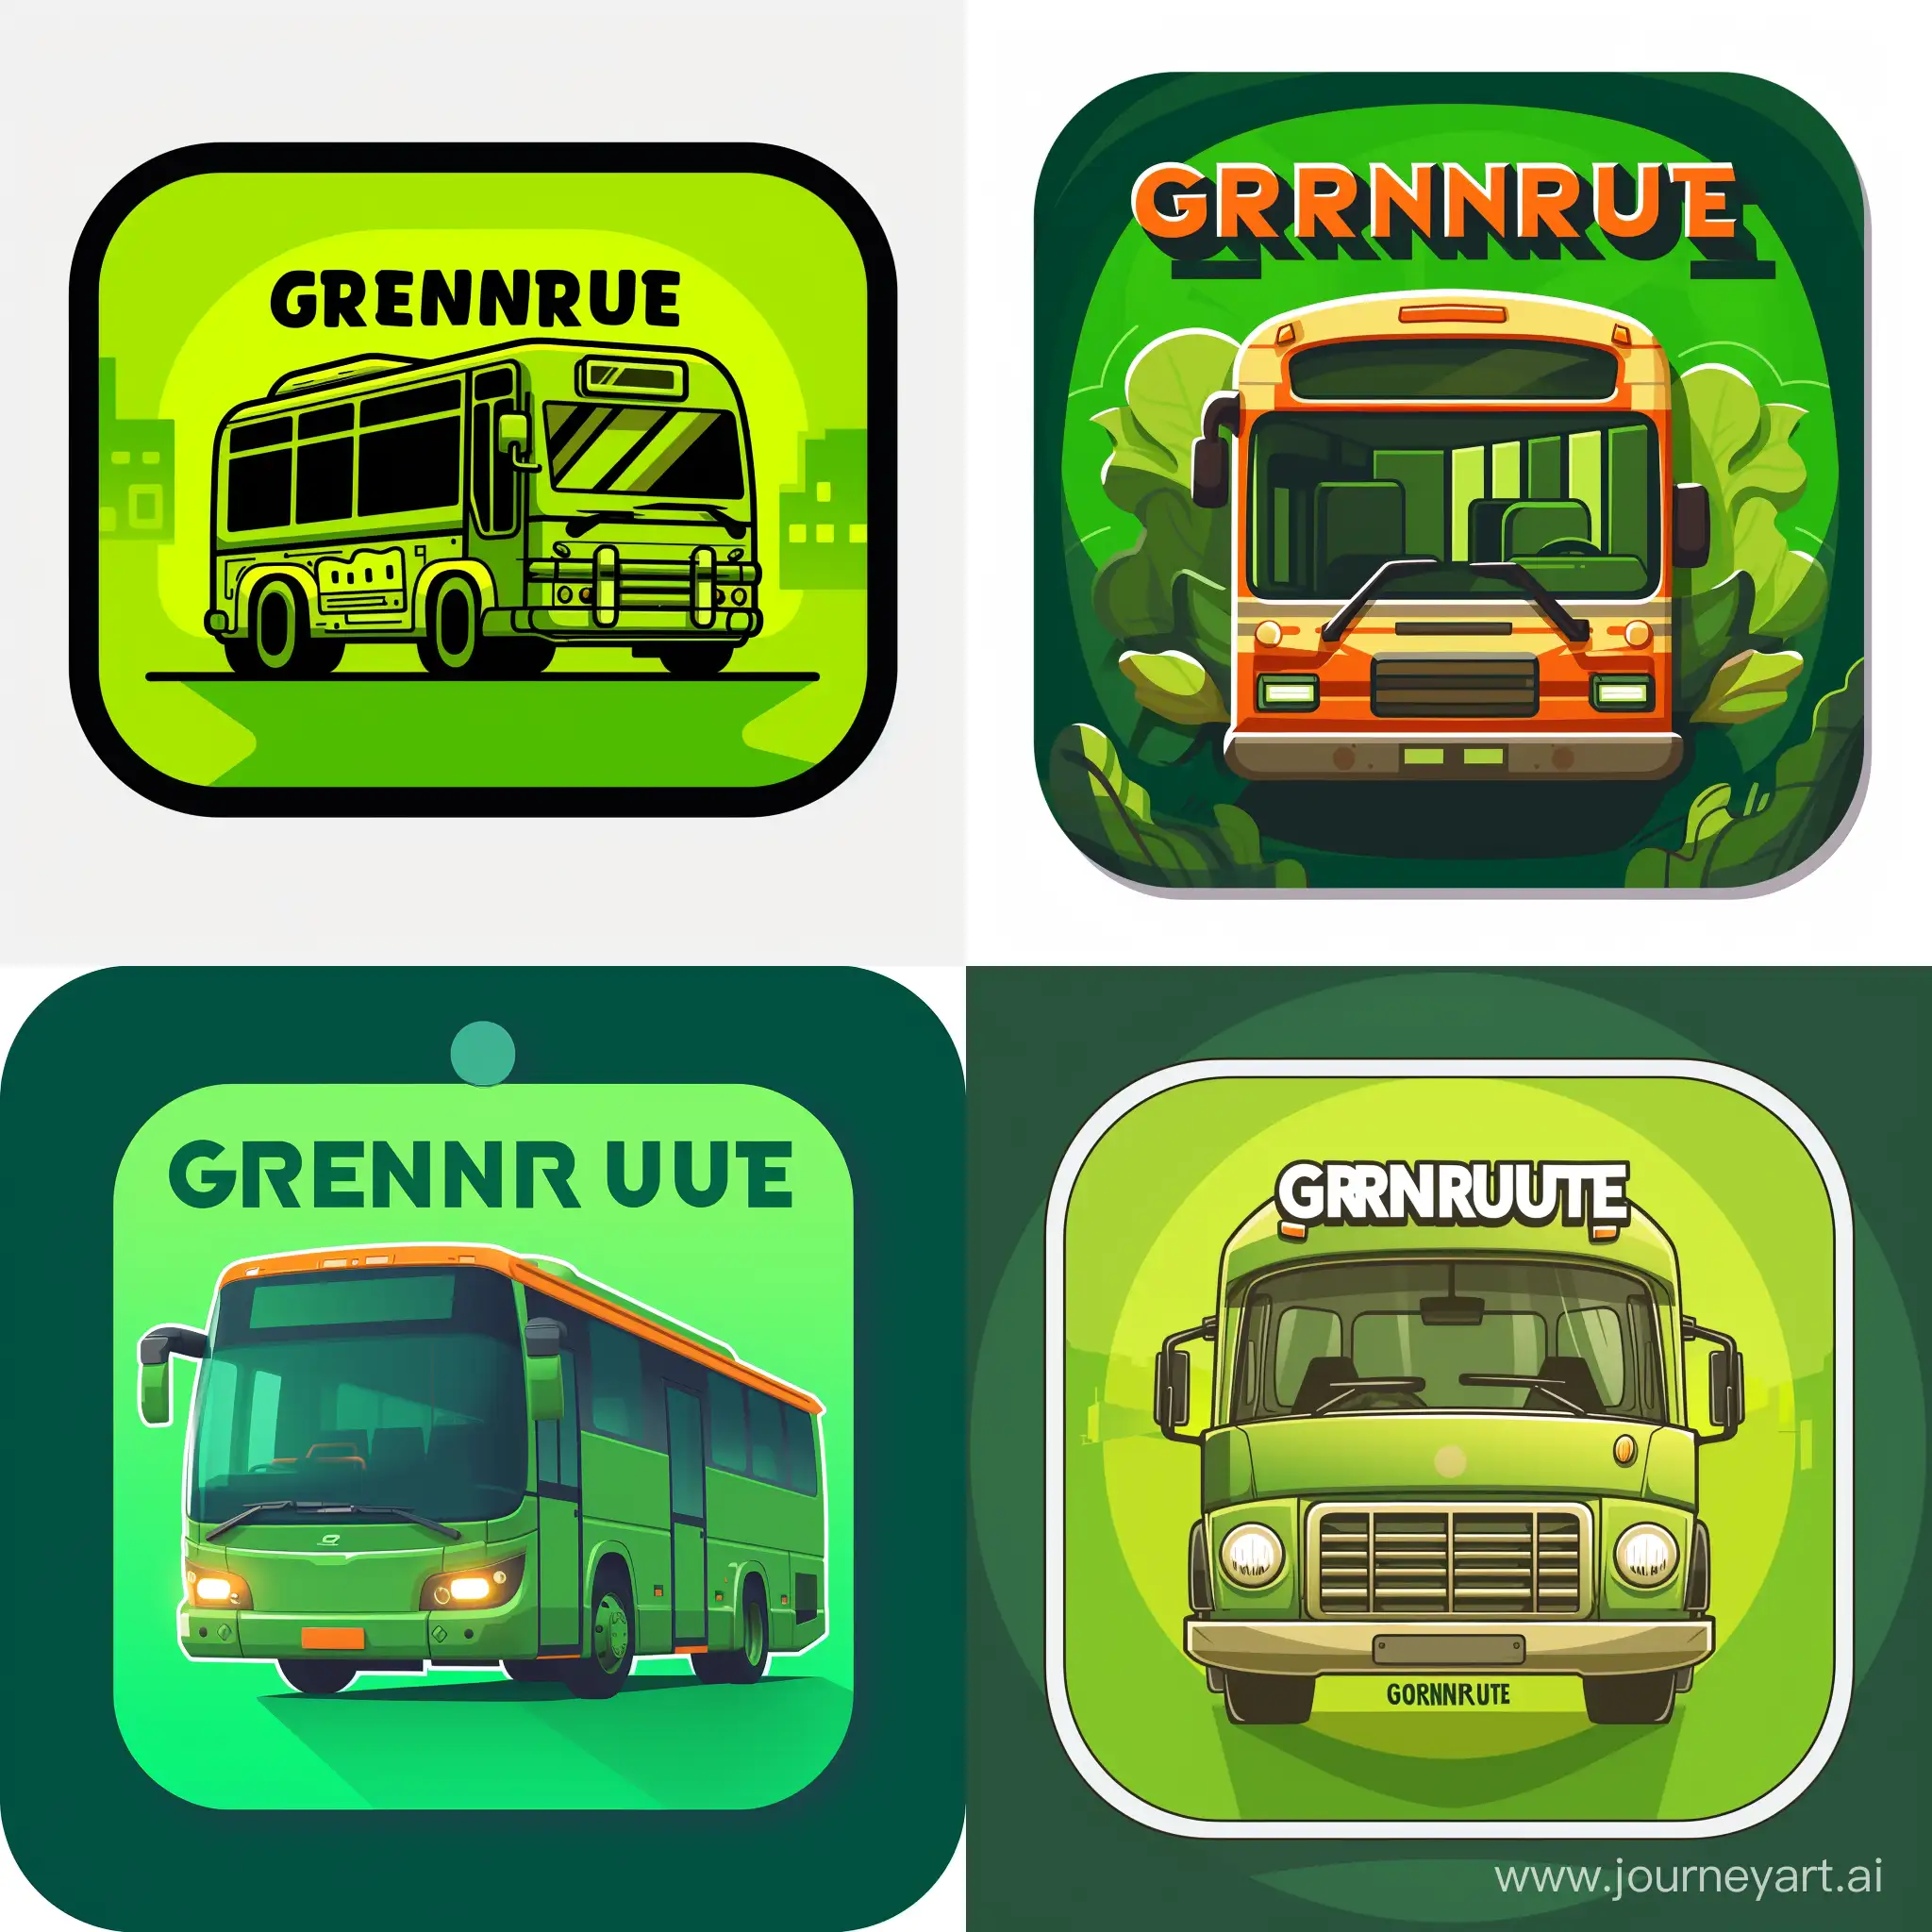 Can you make a logo for an app with a bright green background with a bus on front. Add the word GRØNNRUTE on top